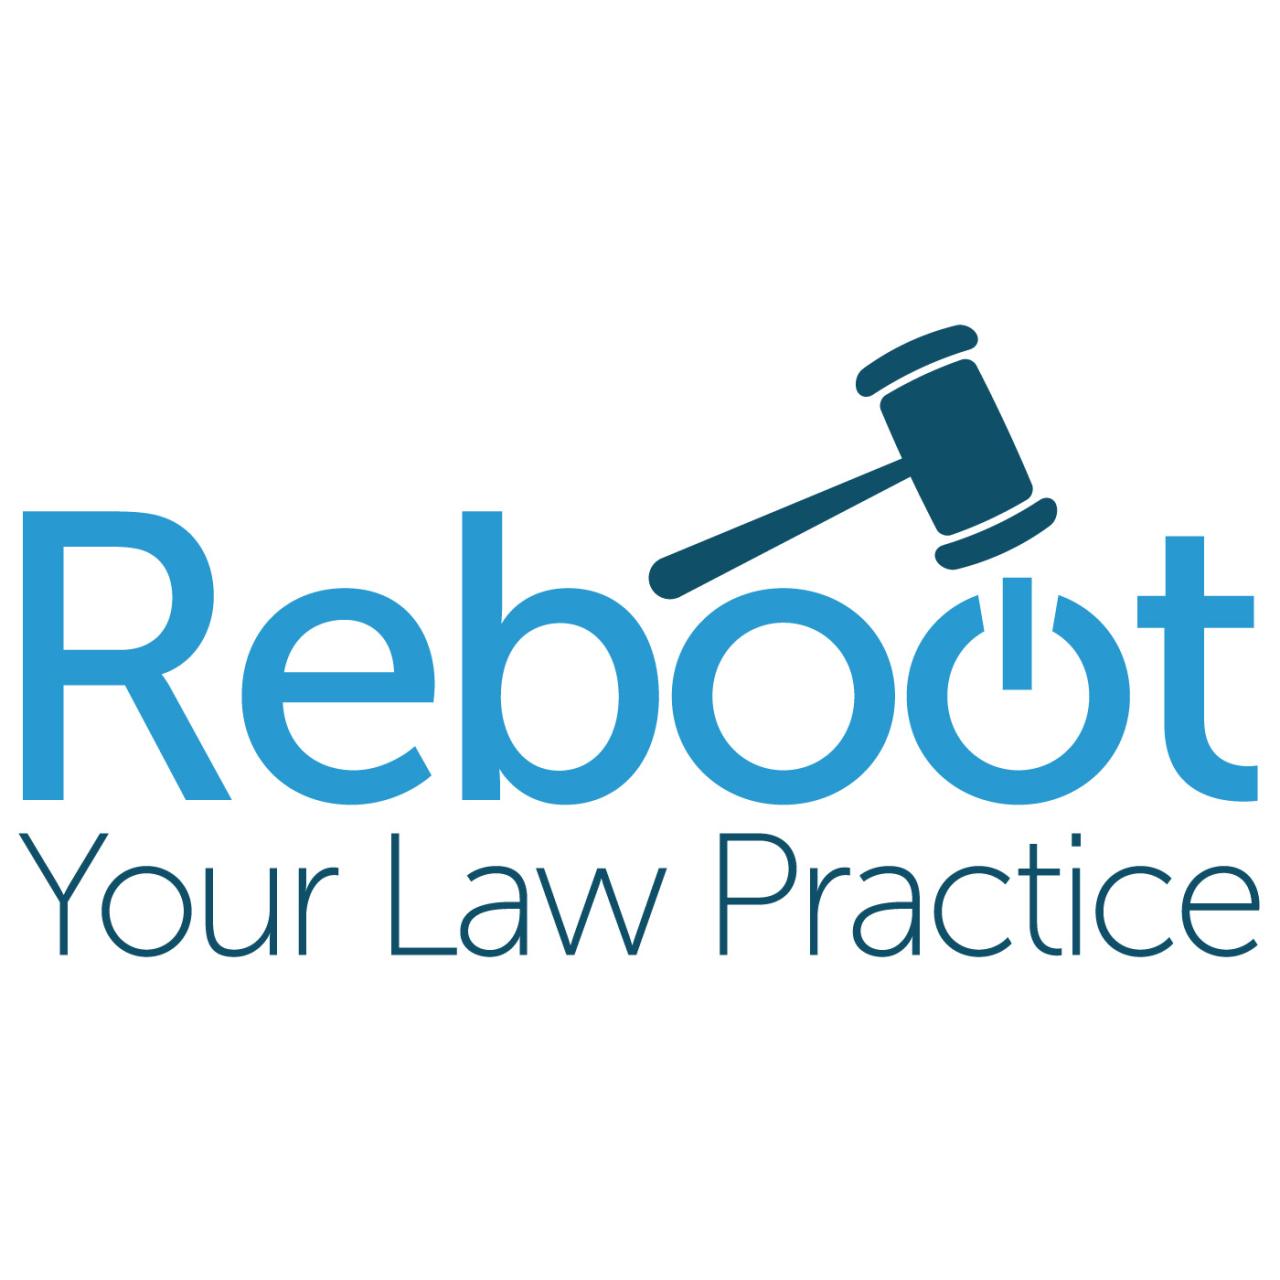 Reboot your law practice podcast 1 intro to the series